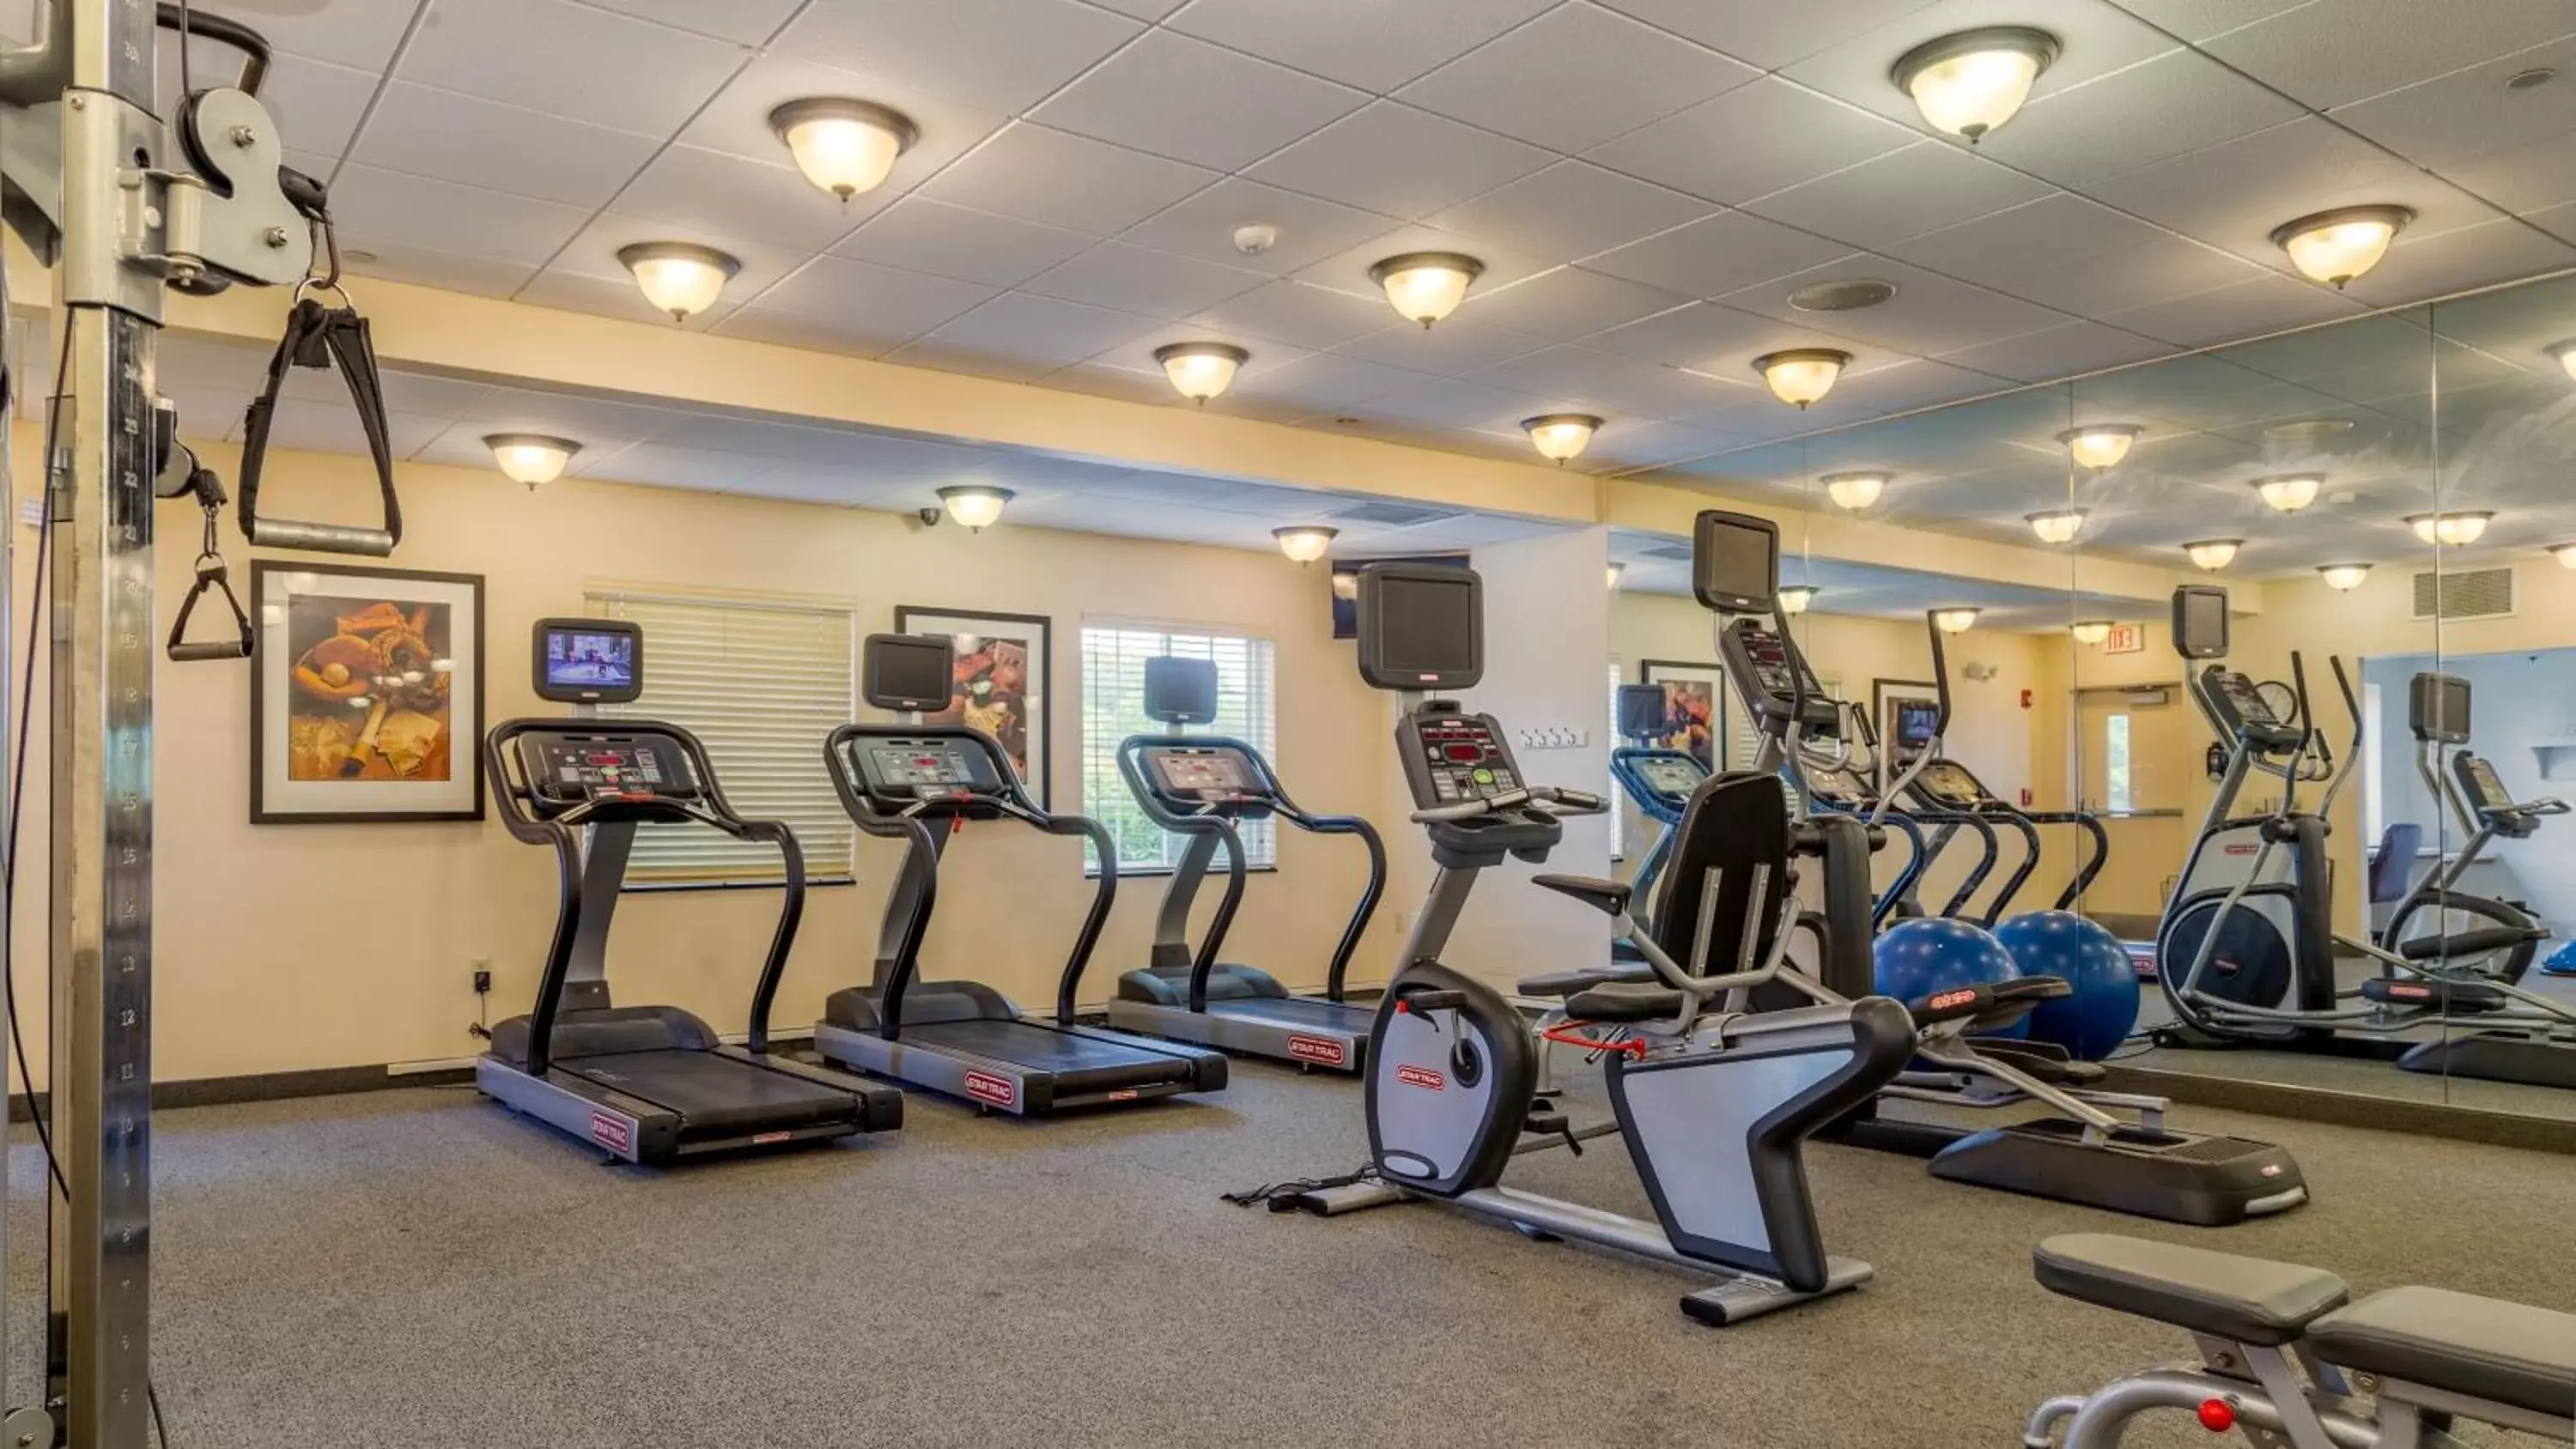 Fitness centre/facilities, Fitness Center/Facilities in Staybridge Suites - Philadelphia Valley Forge 422, an IHG Hotel